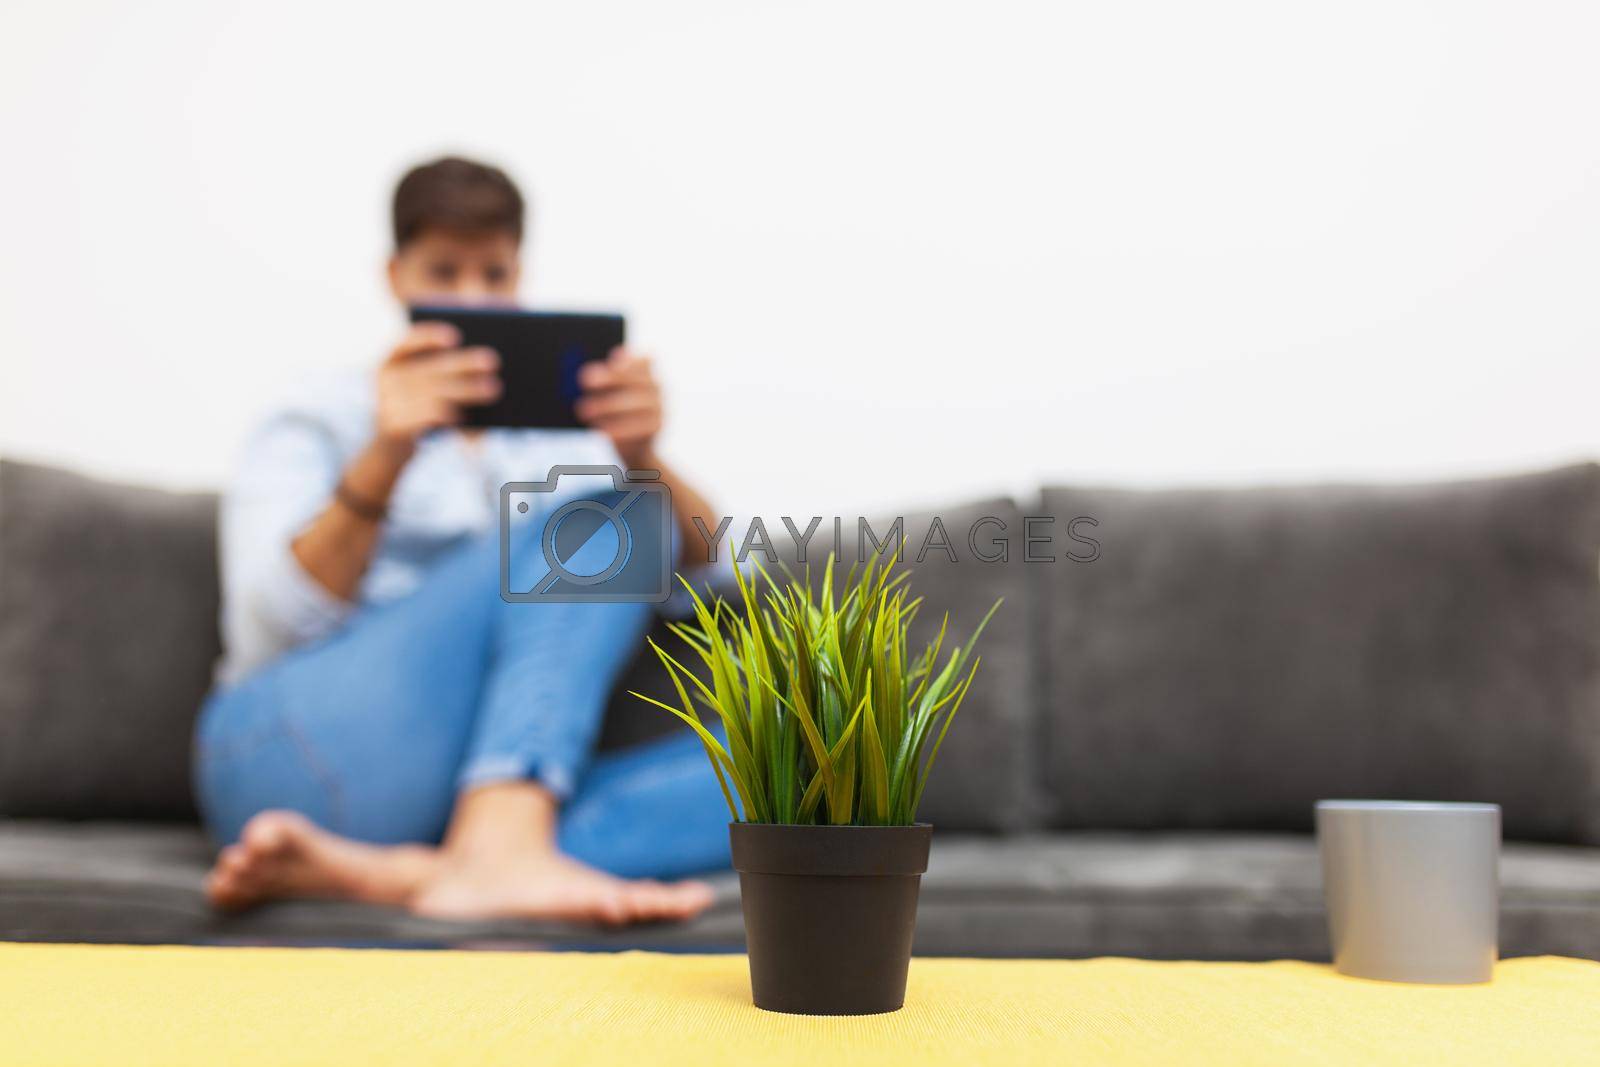 Royalty free image of green plant in a pot on a table in living room by kokimk